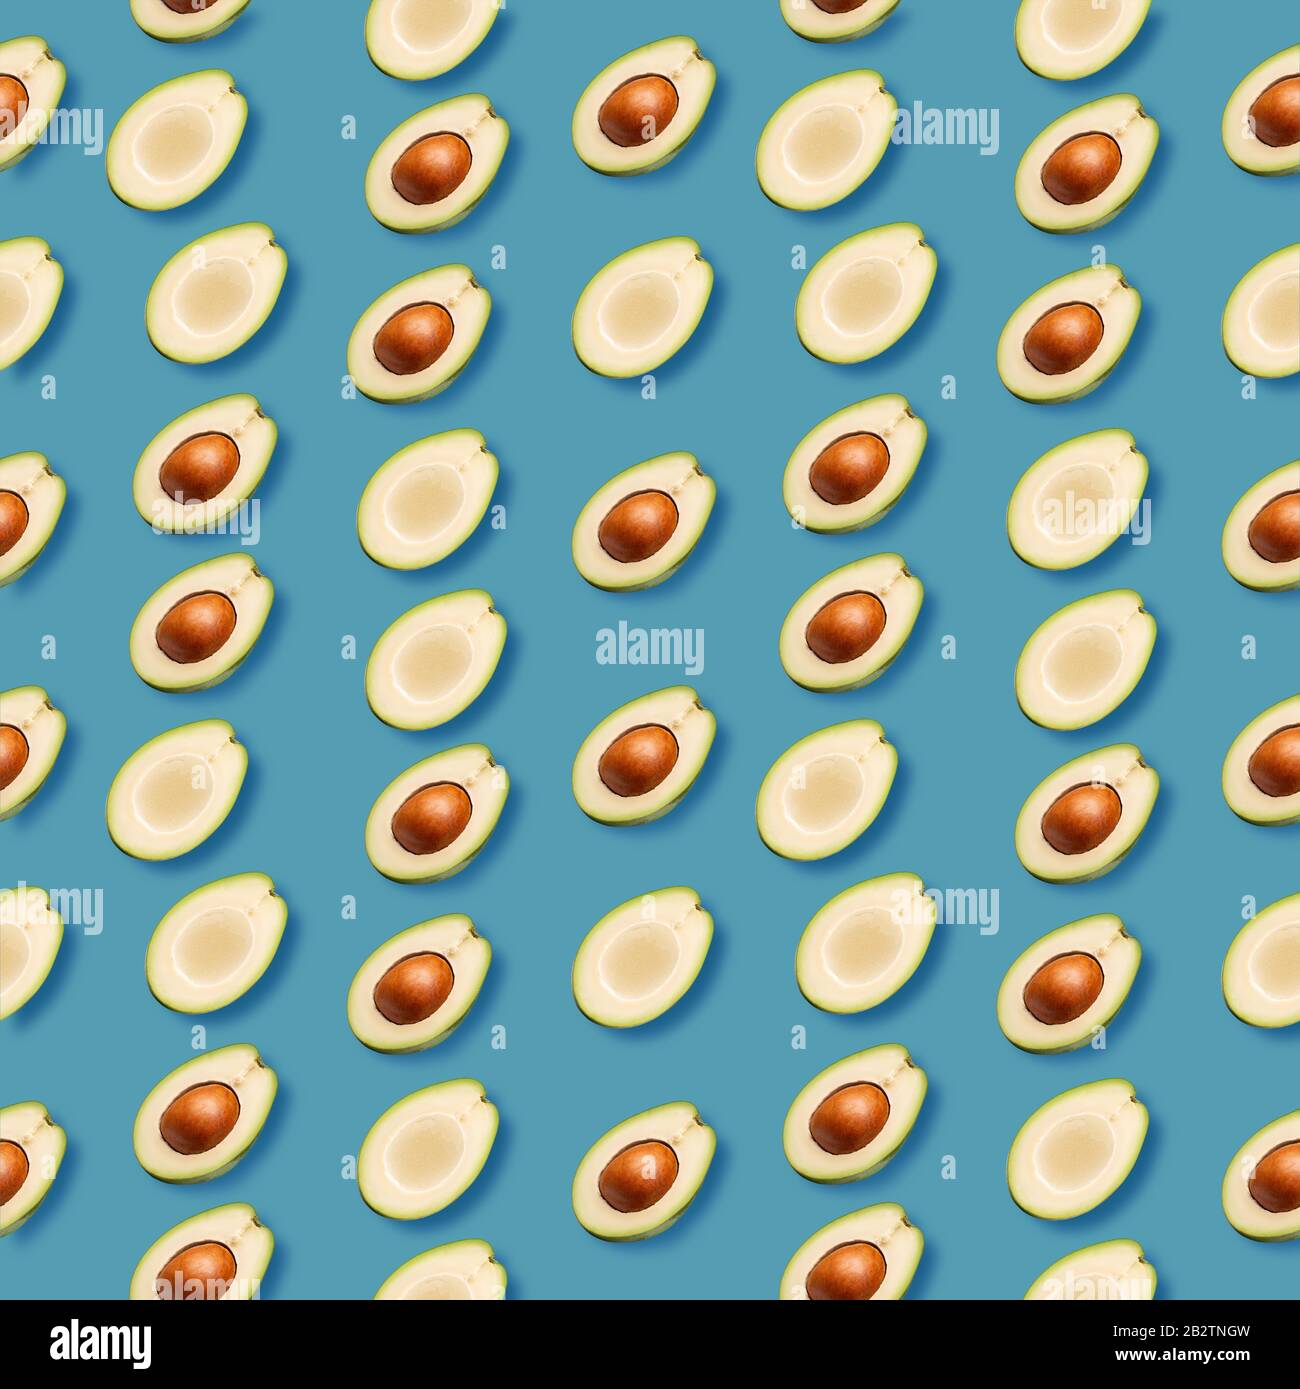 pattern with avocado slices on a blue background. Stock Photo